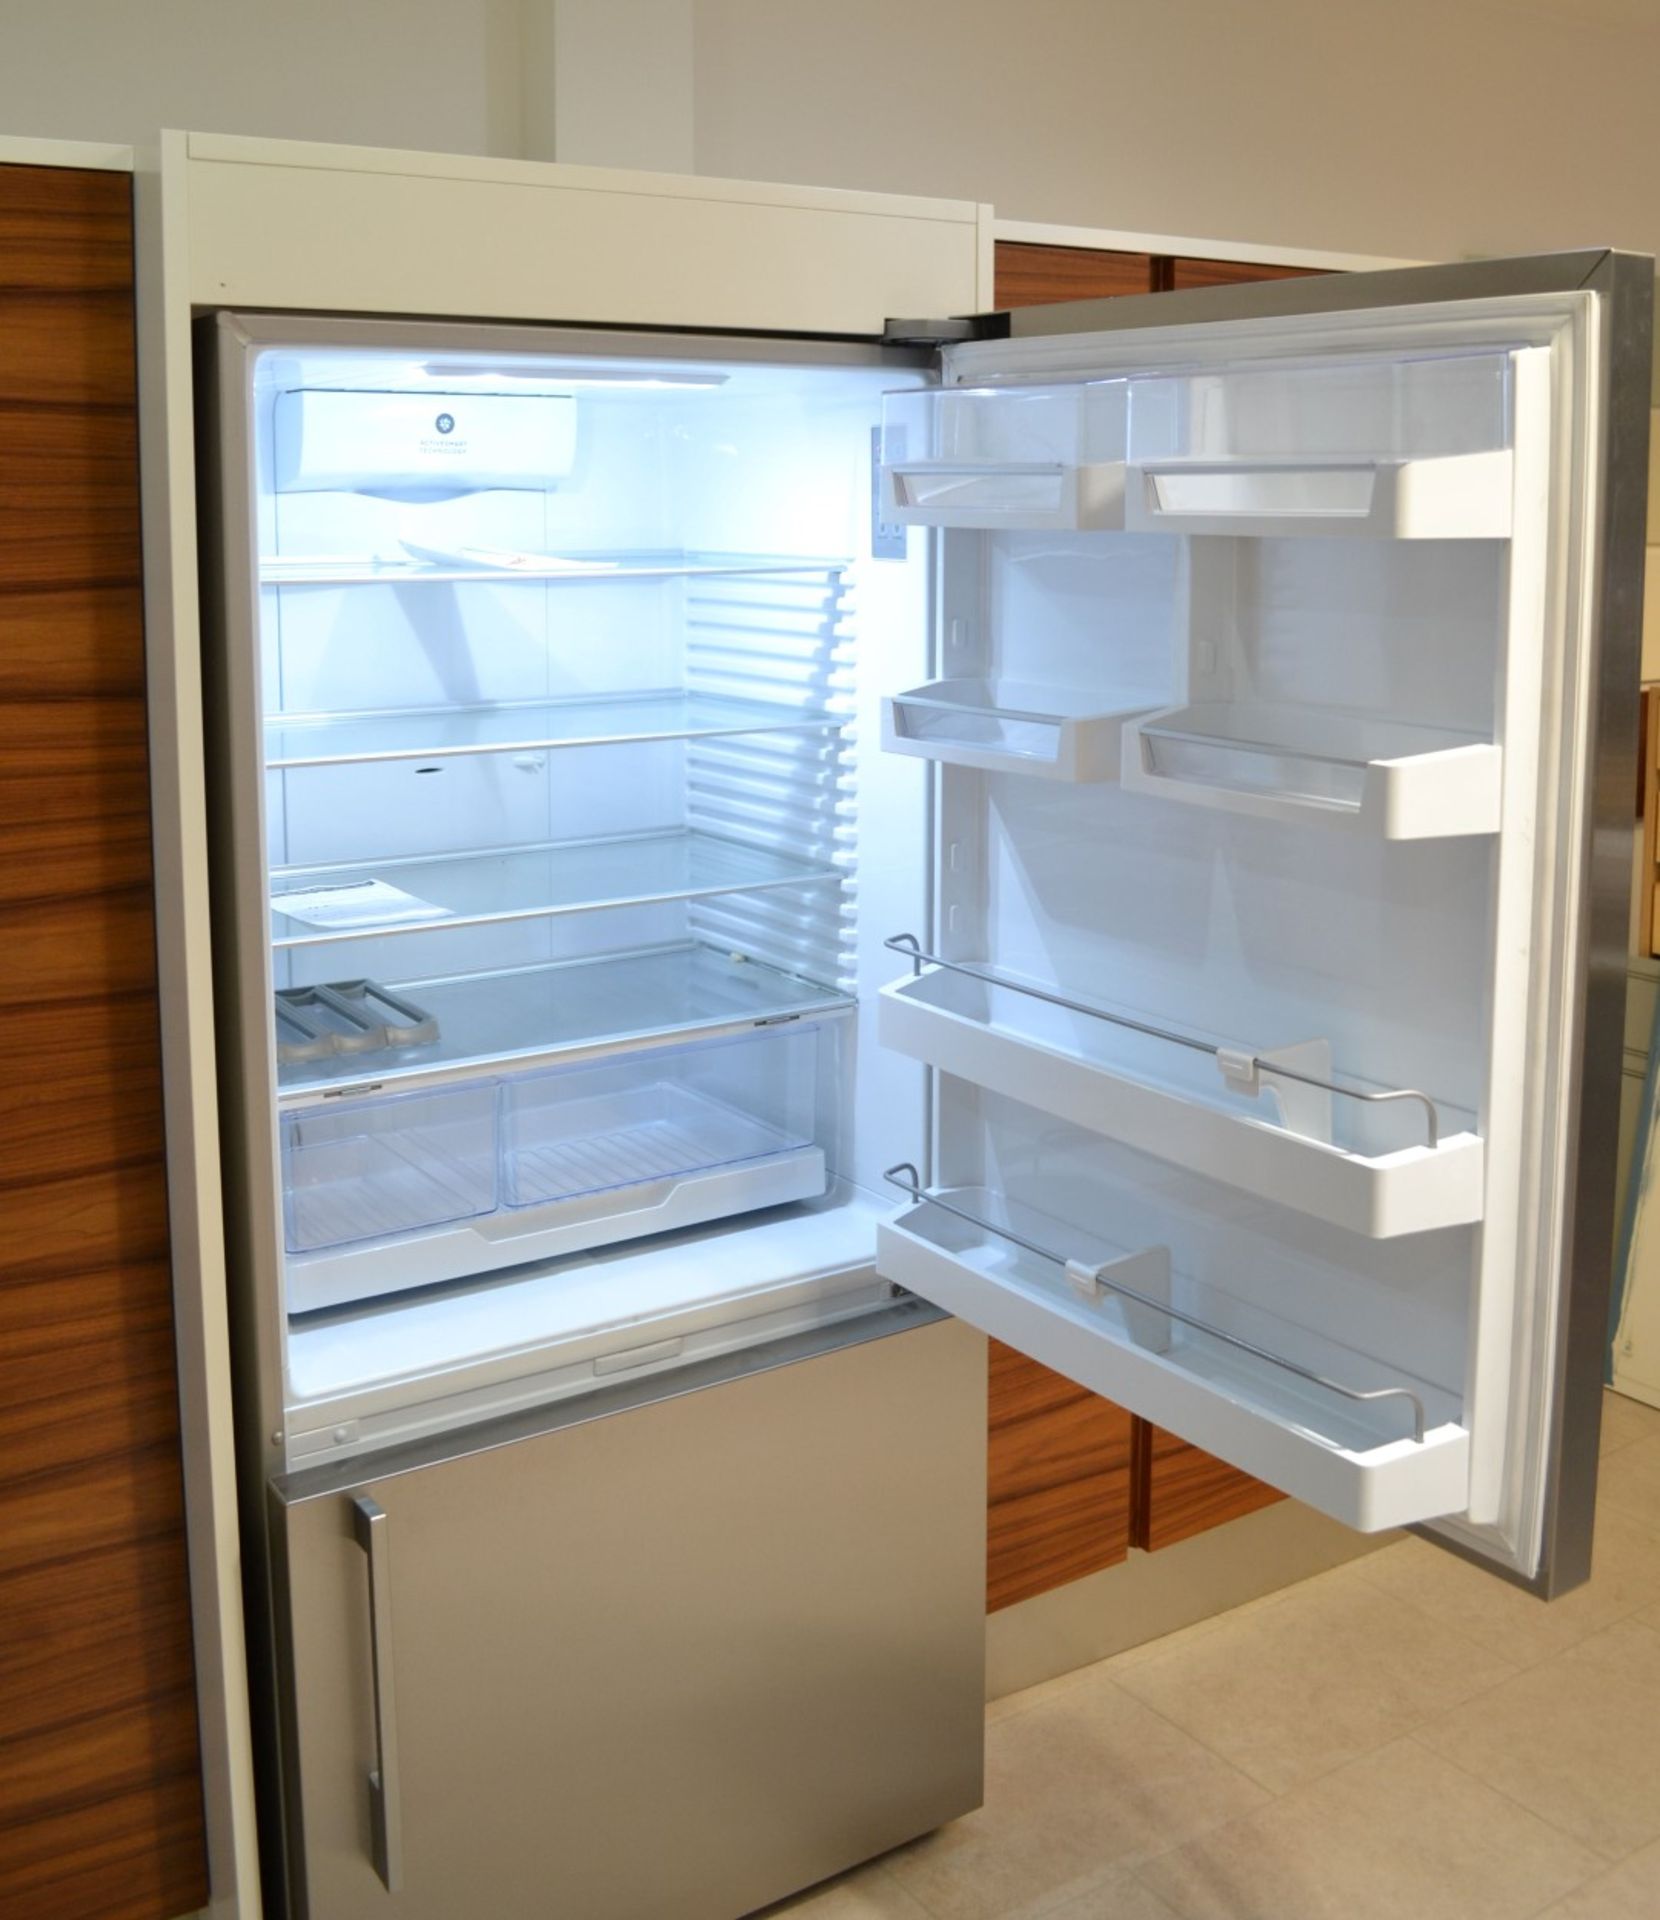 1 x Fisher & Paykel Stainless Steel 790mm 469 Litre Fridge Freezer from Showroom Display Kitchen - - Image 3 of 17